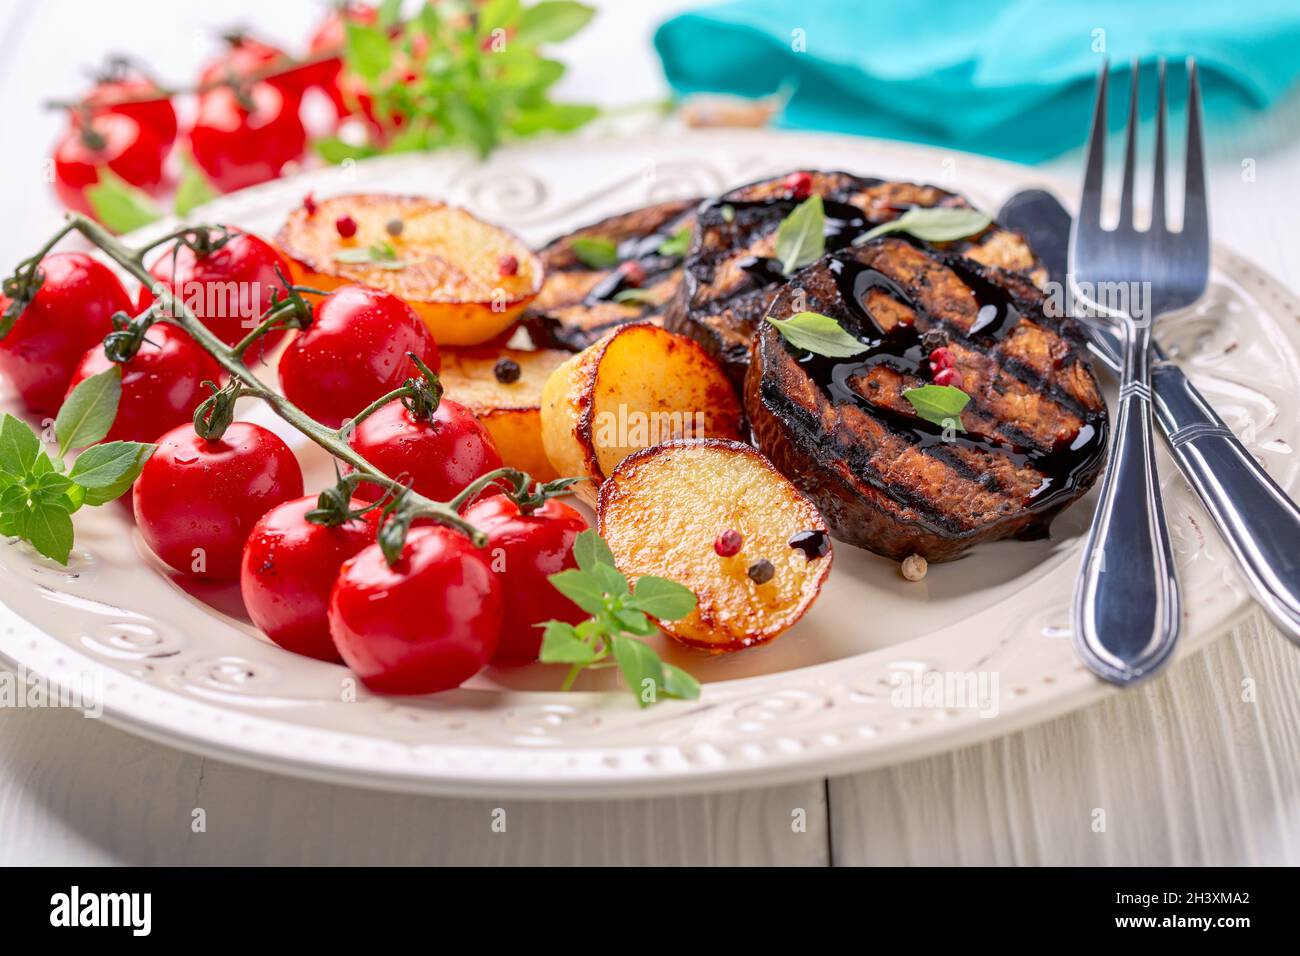 Delicious grilled eggplant steaks with vegetables. Stock Photo